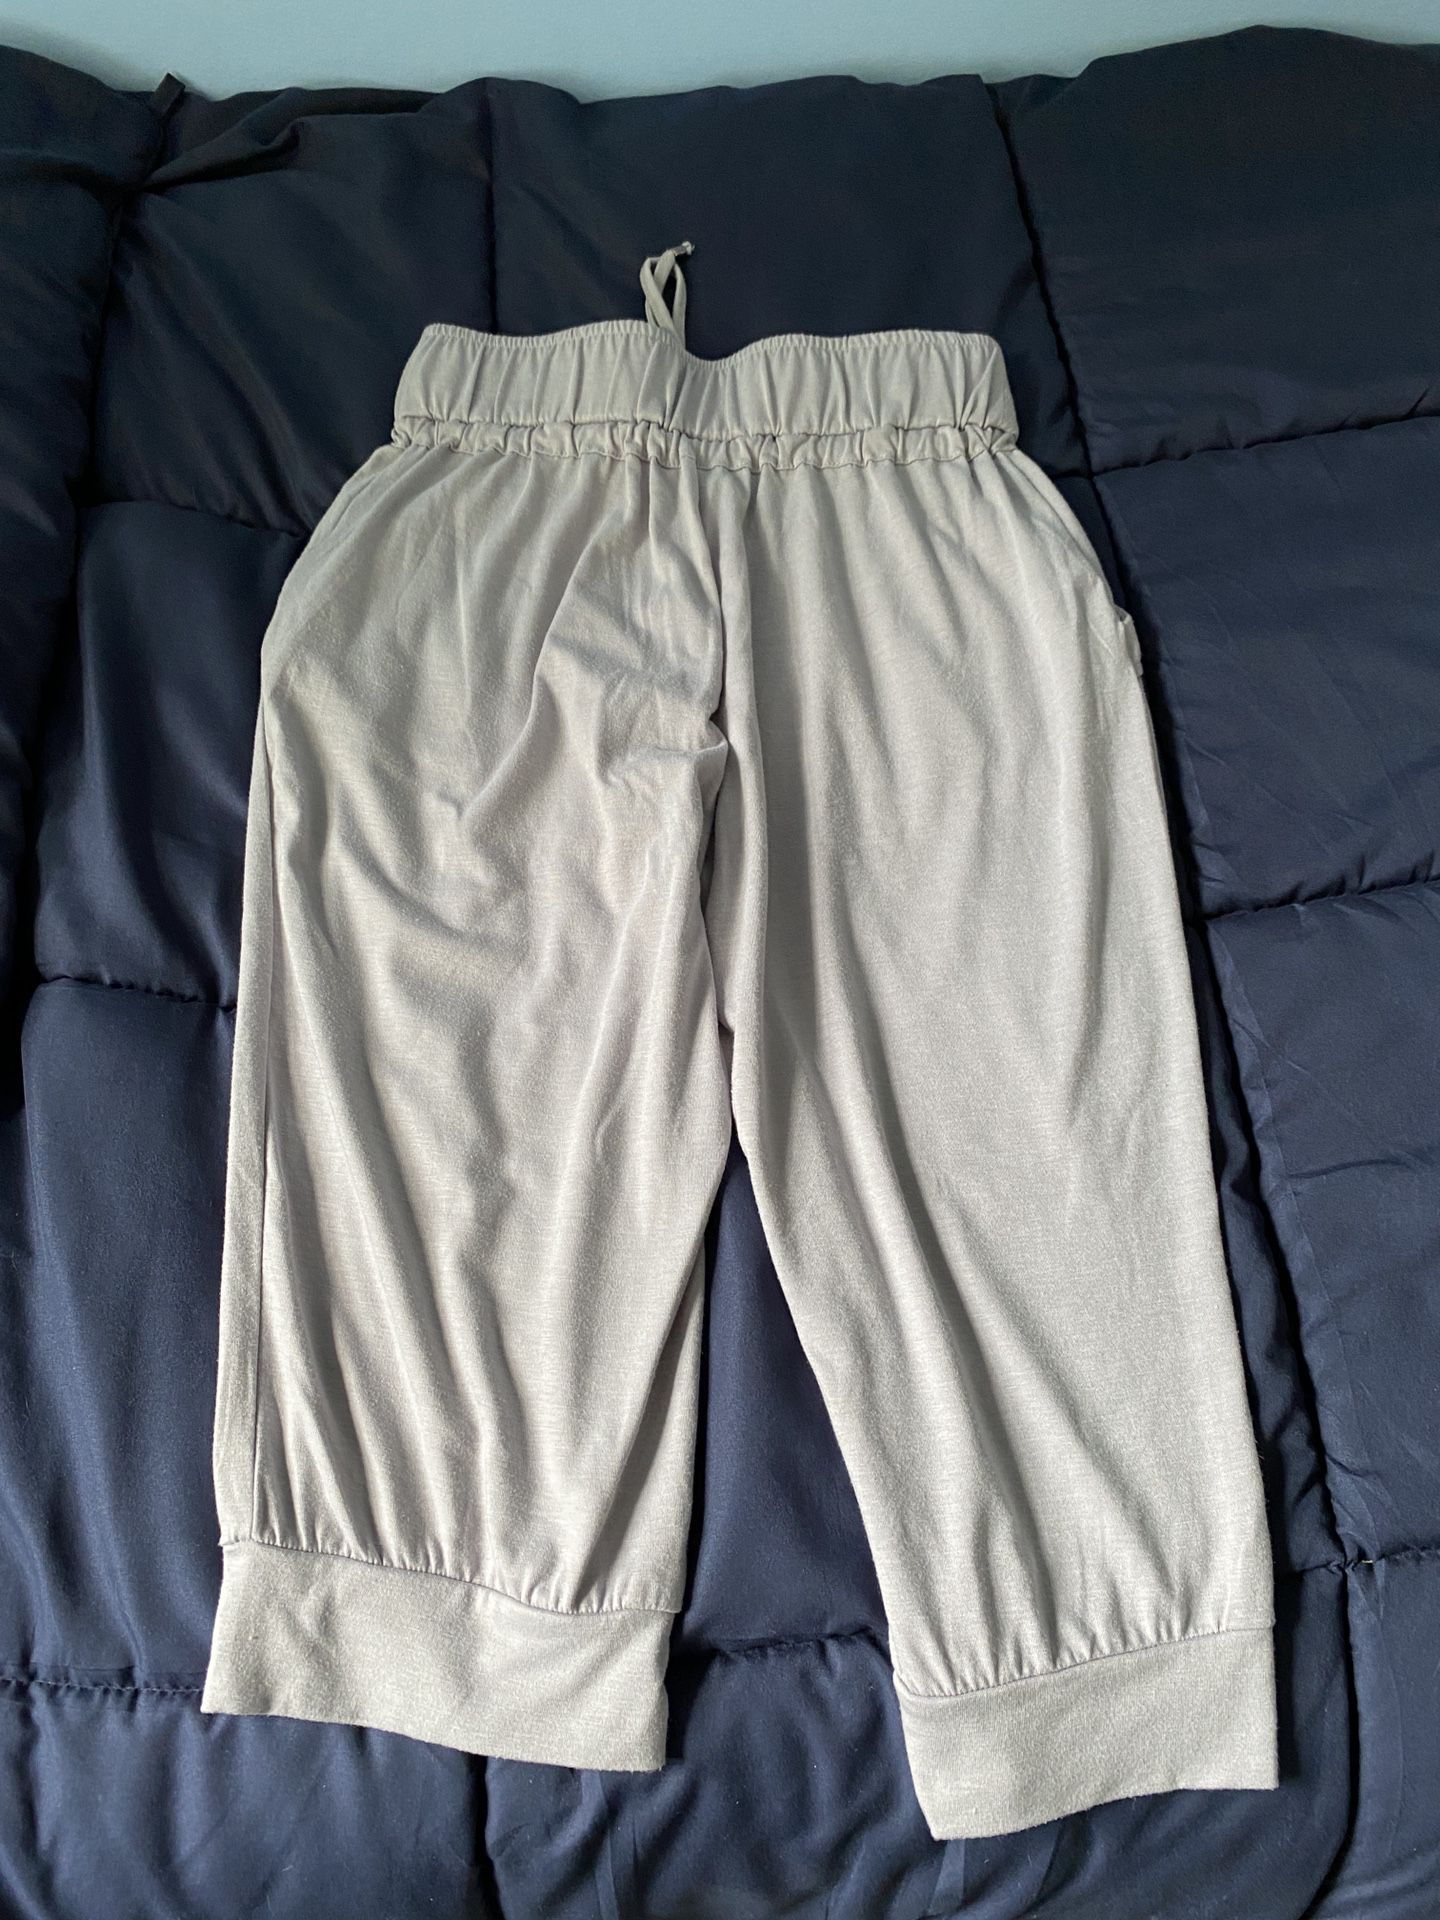 Gray Capris for Sale in Manchester, CT - OfferUp